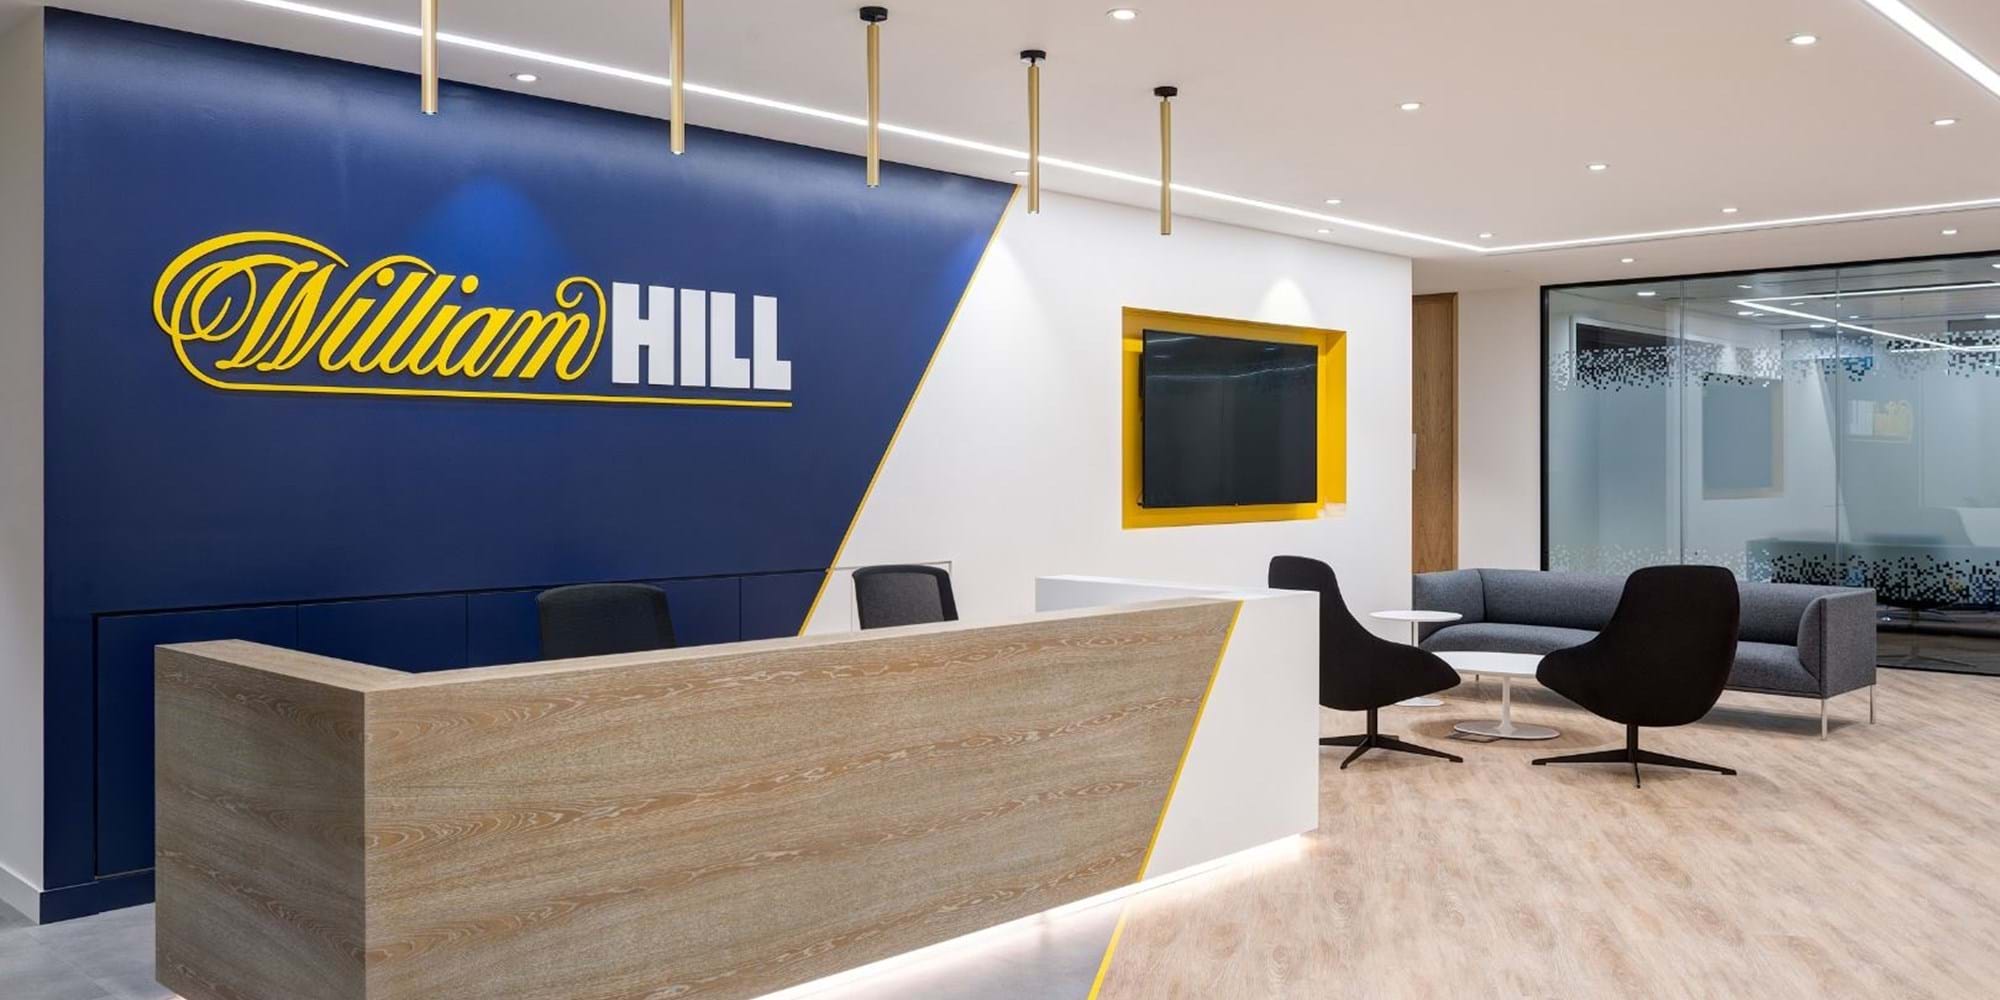 Modus Workspace office design, fit out and refurbishment - William Hill - William Hill 01 highres sRGB.jpg